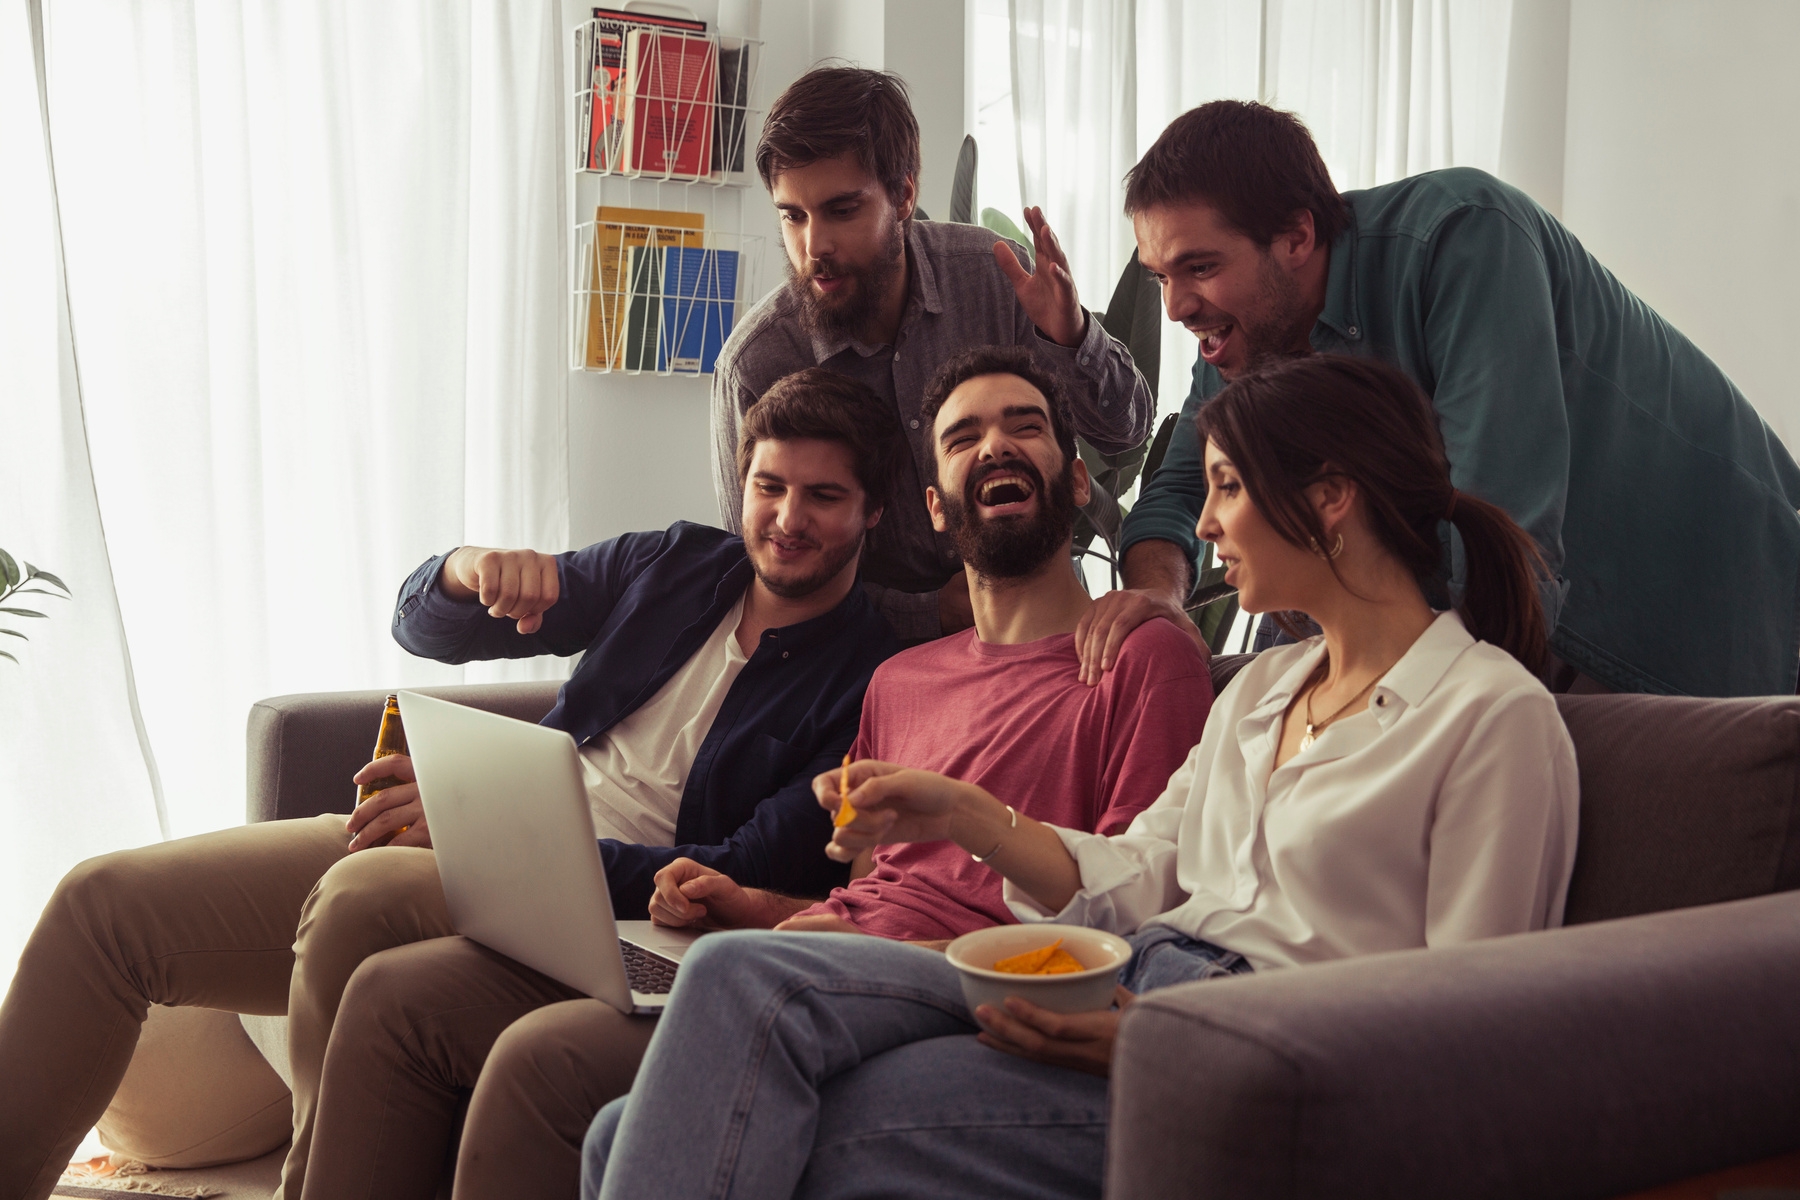 6 people are gathered around a couch, holding drinks and engaging in conversation. One person is holding a bowl of
popcorn